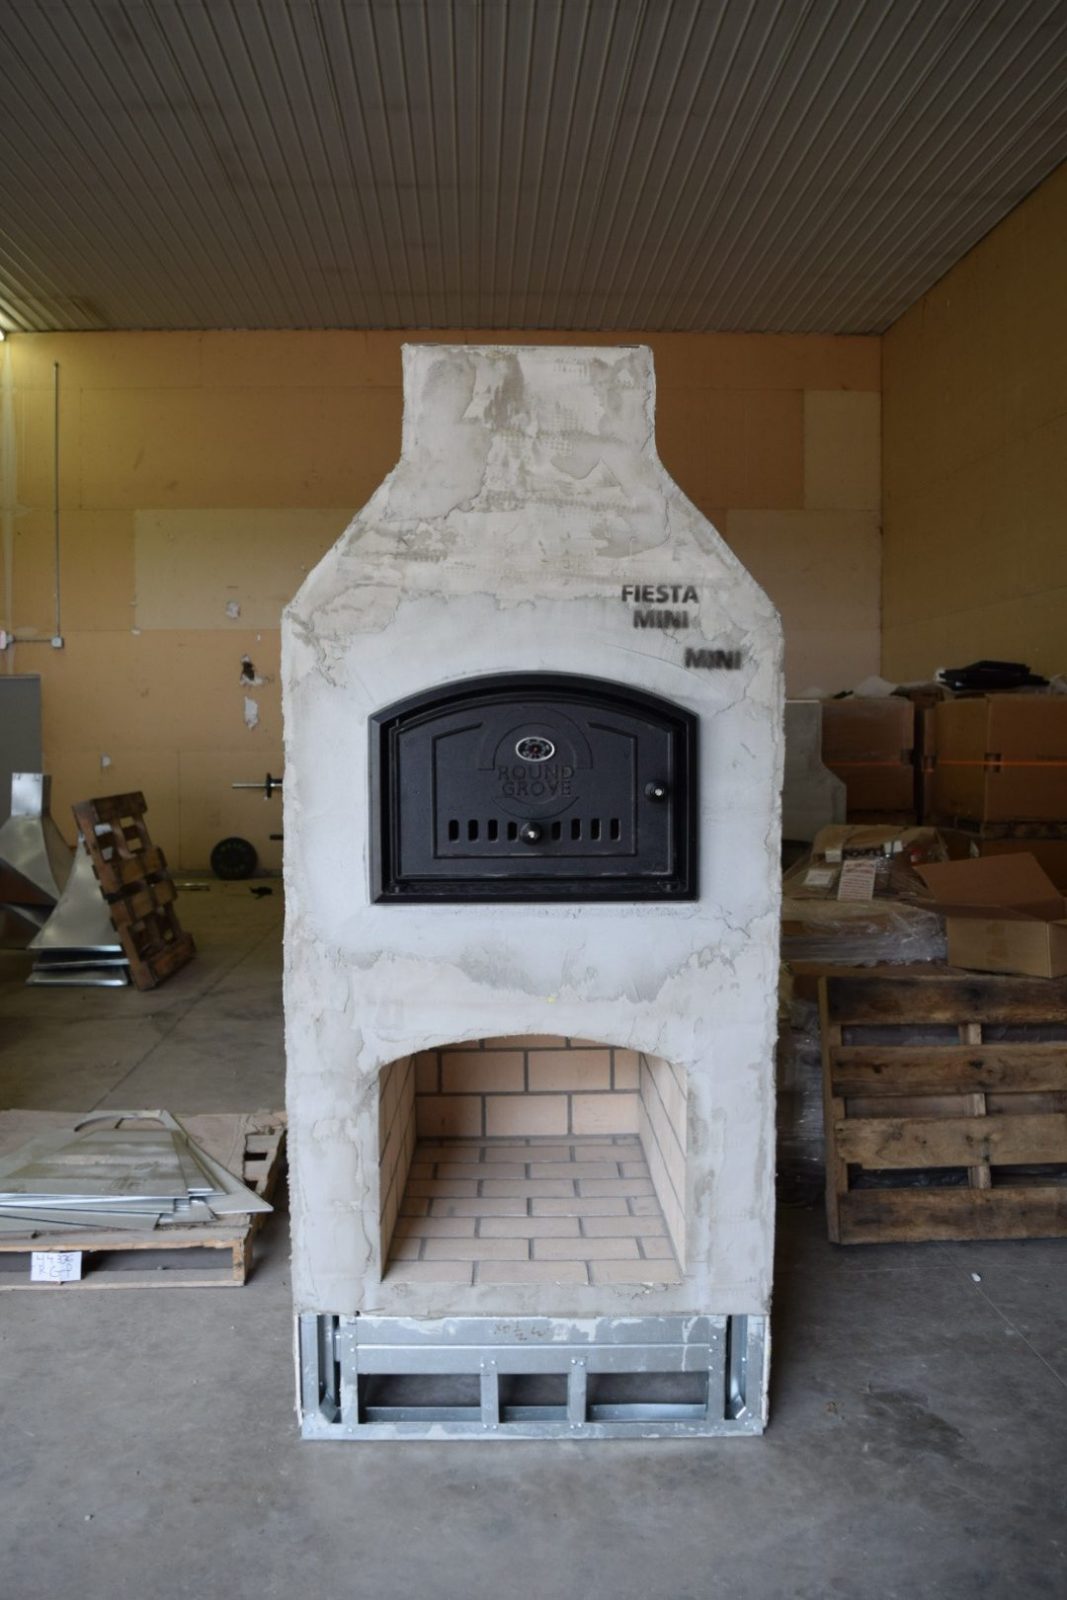 Round Grove Kiva Fireplace With Pizza Oven Combo